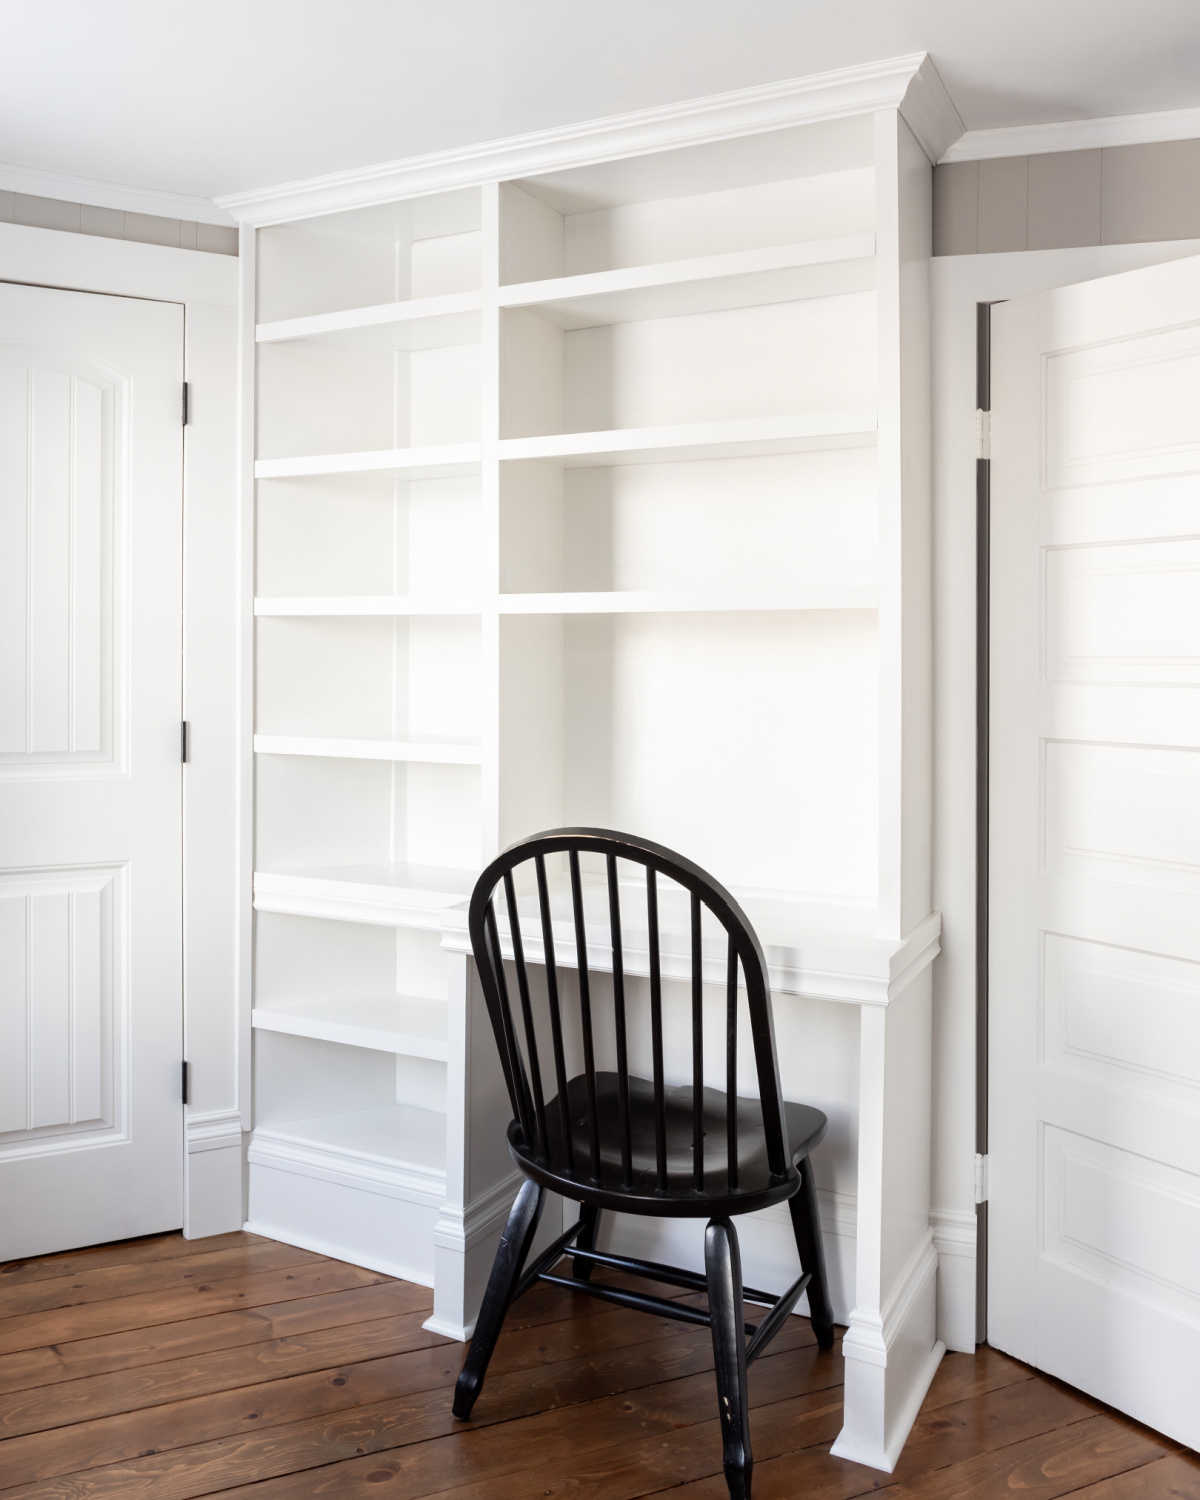 Benjamin Moore Simply White on trim and on the bookshelf.